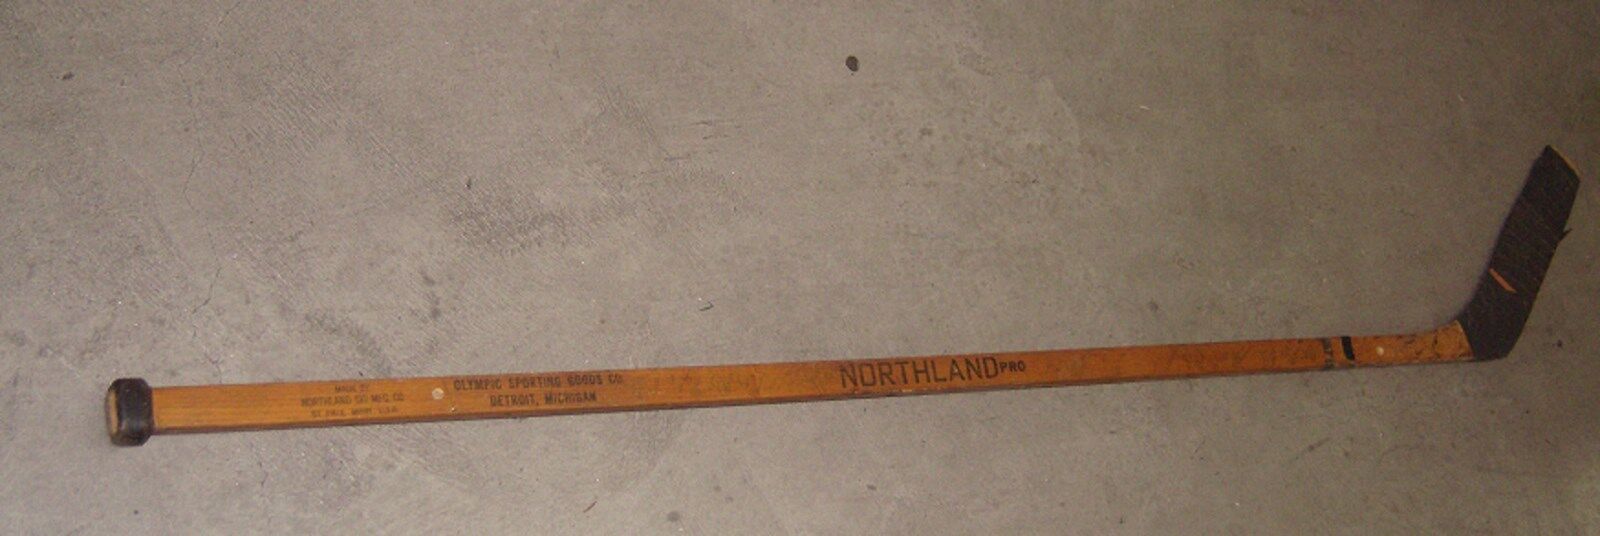 DETROIT RED WINGS Norm Ullman game-used Northland Pro stick team